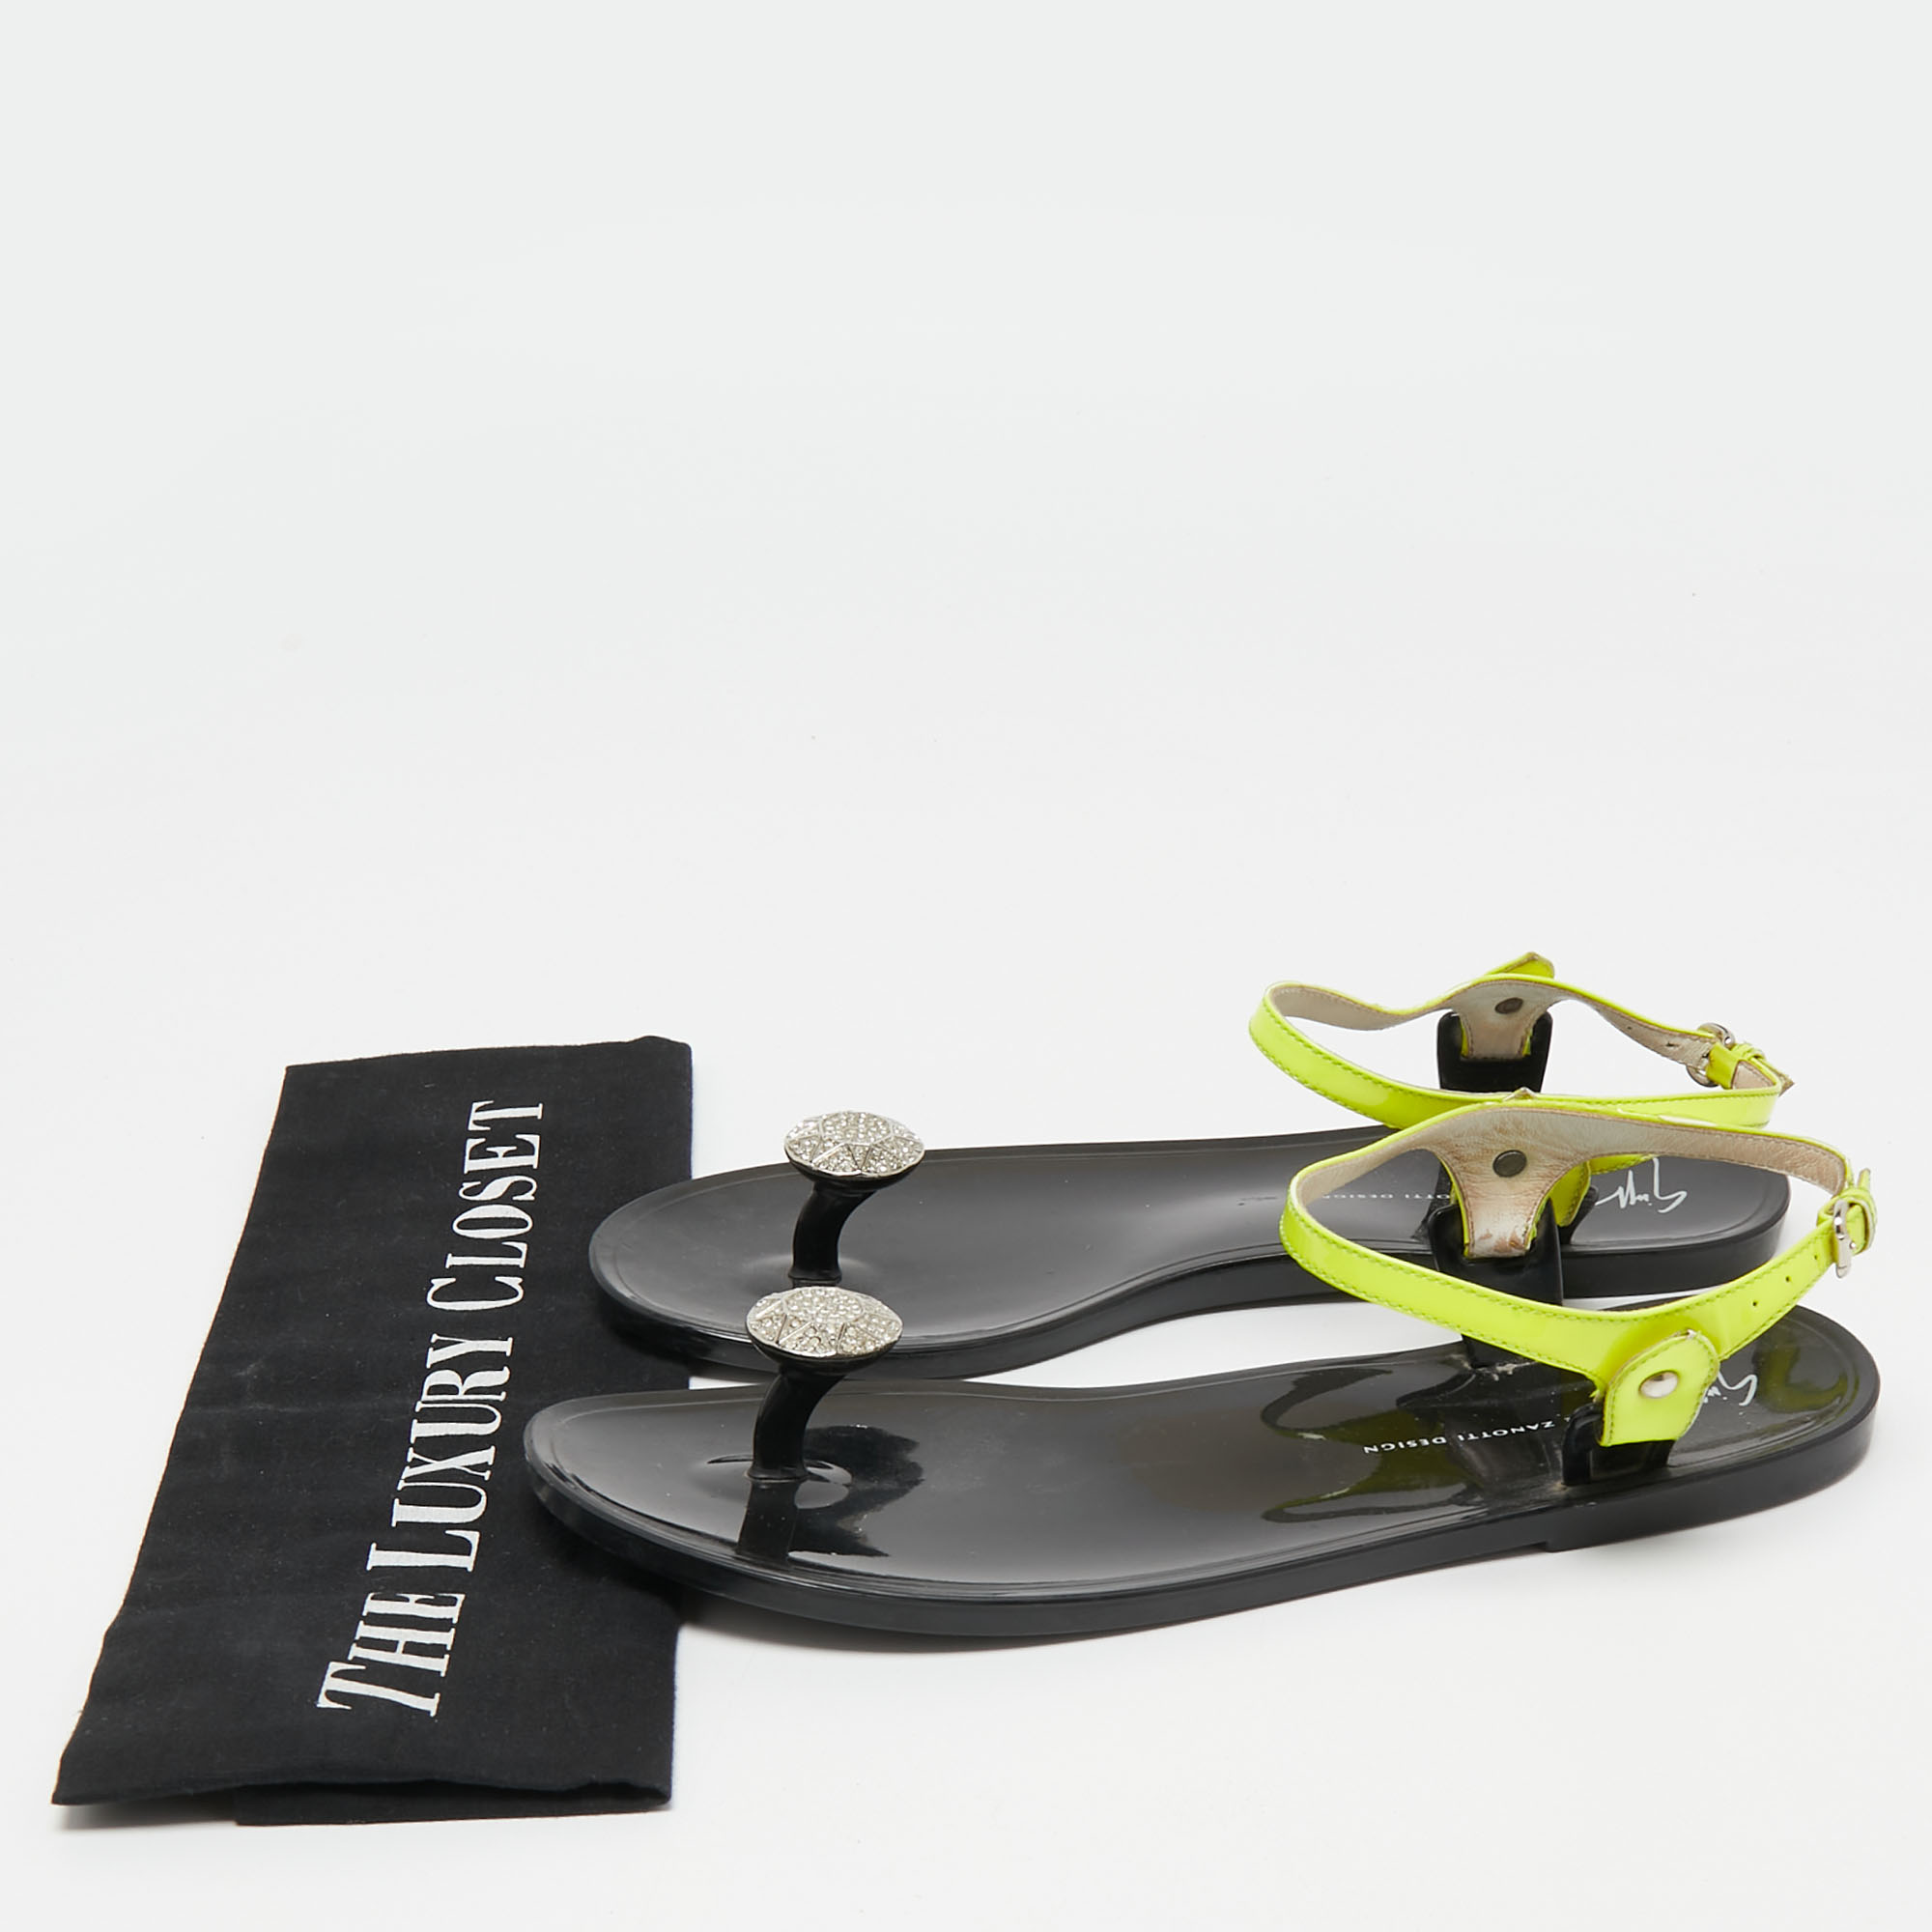 Giuseppe Zanotti Neon Yellow Patent Leather Crystal Embellished Toe Ring Ankle Strap Sandals Size 38